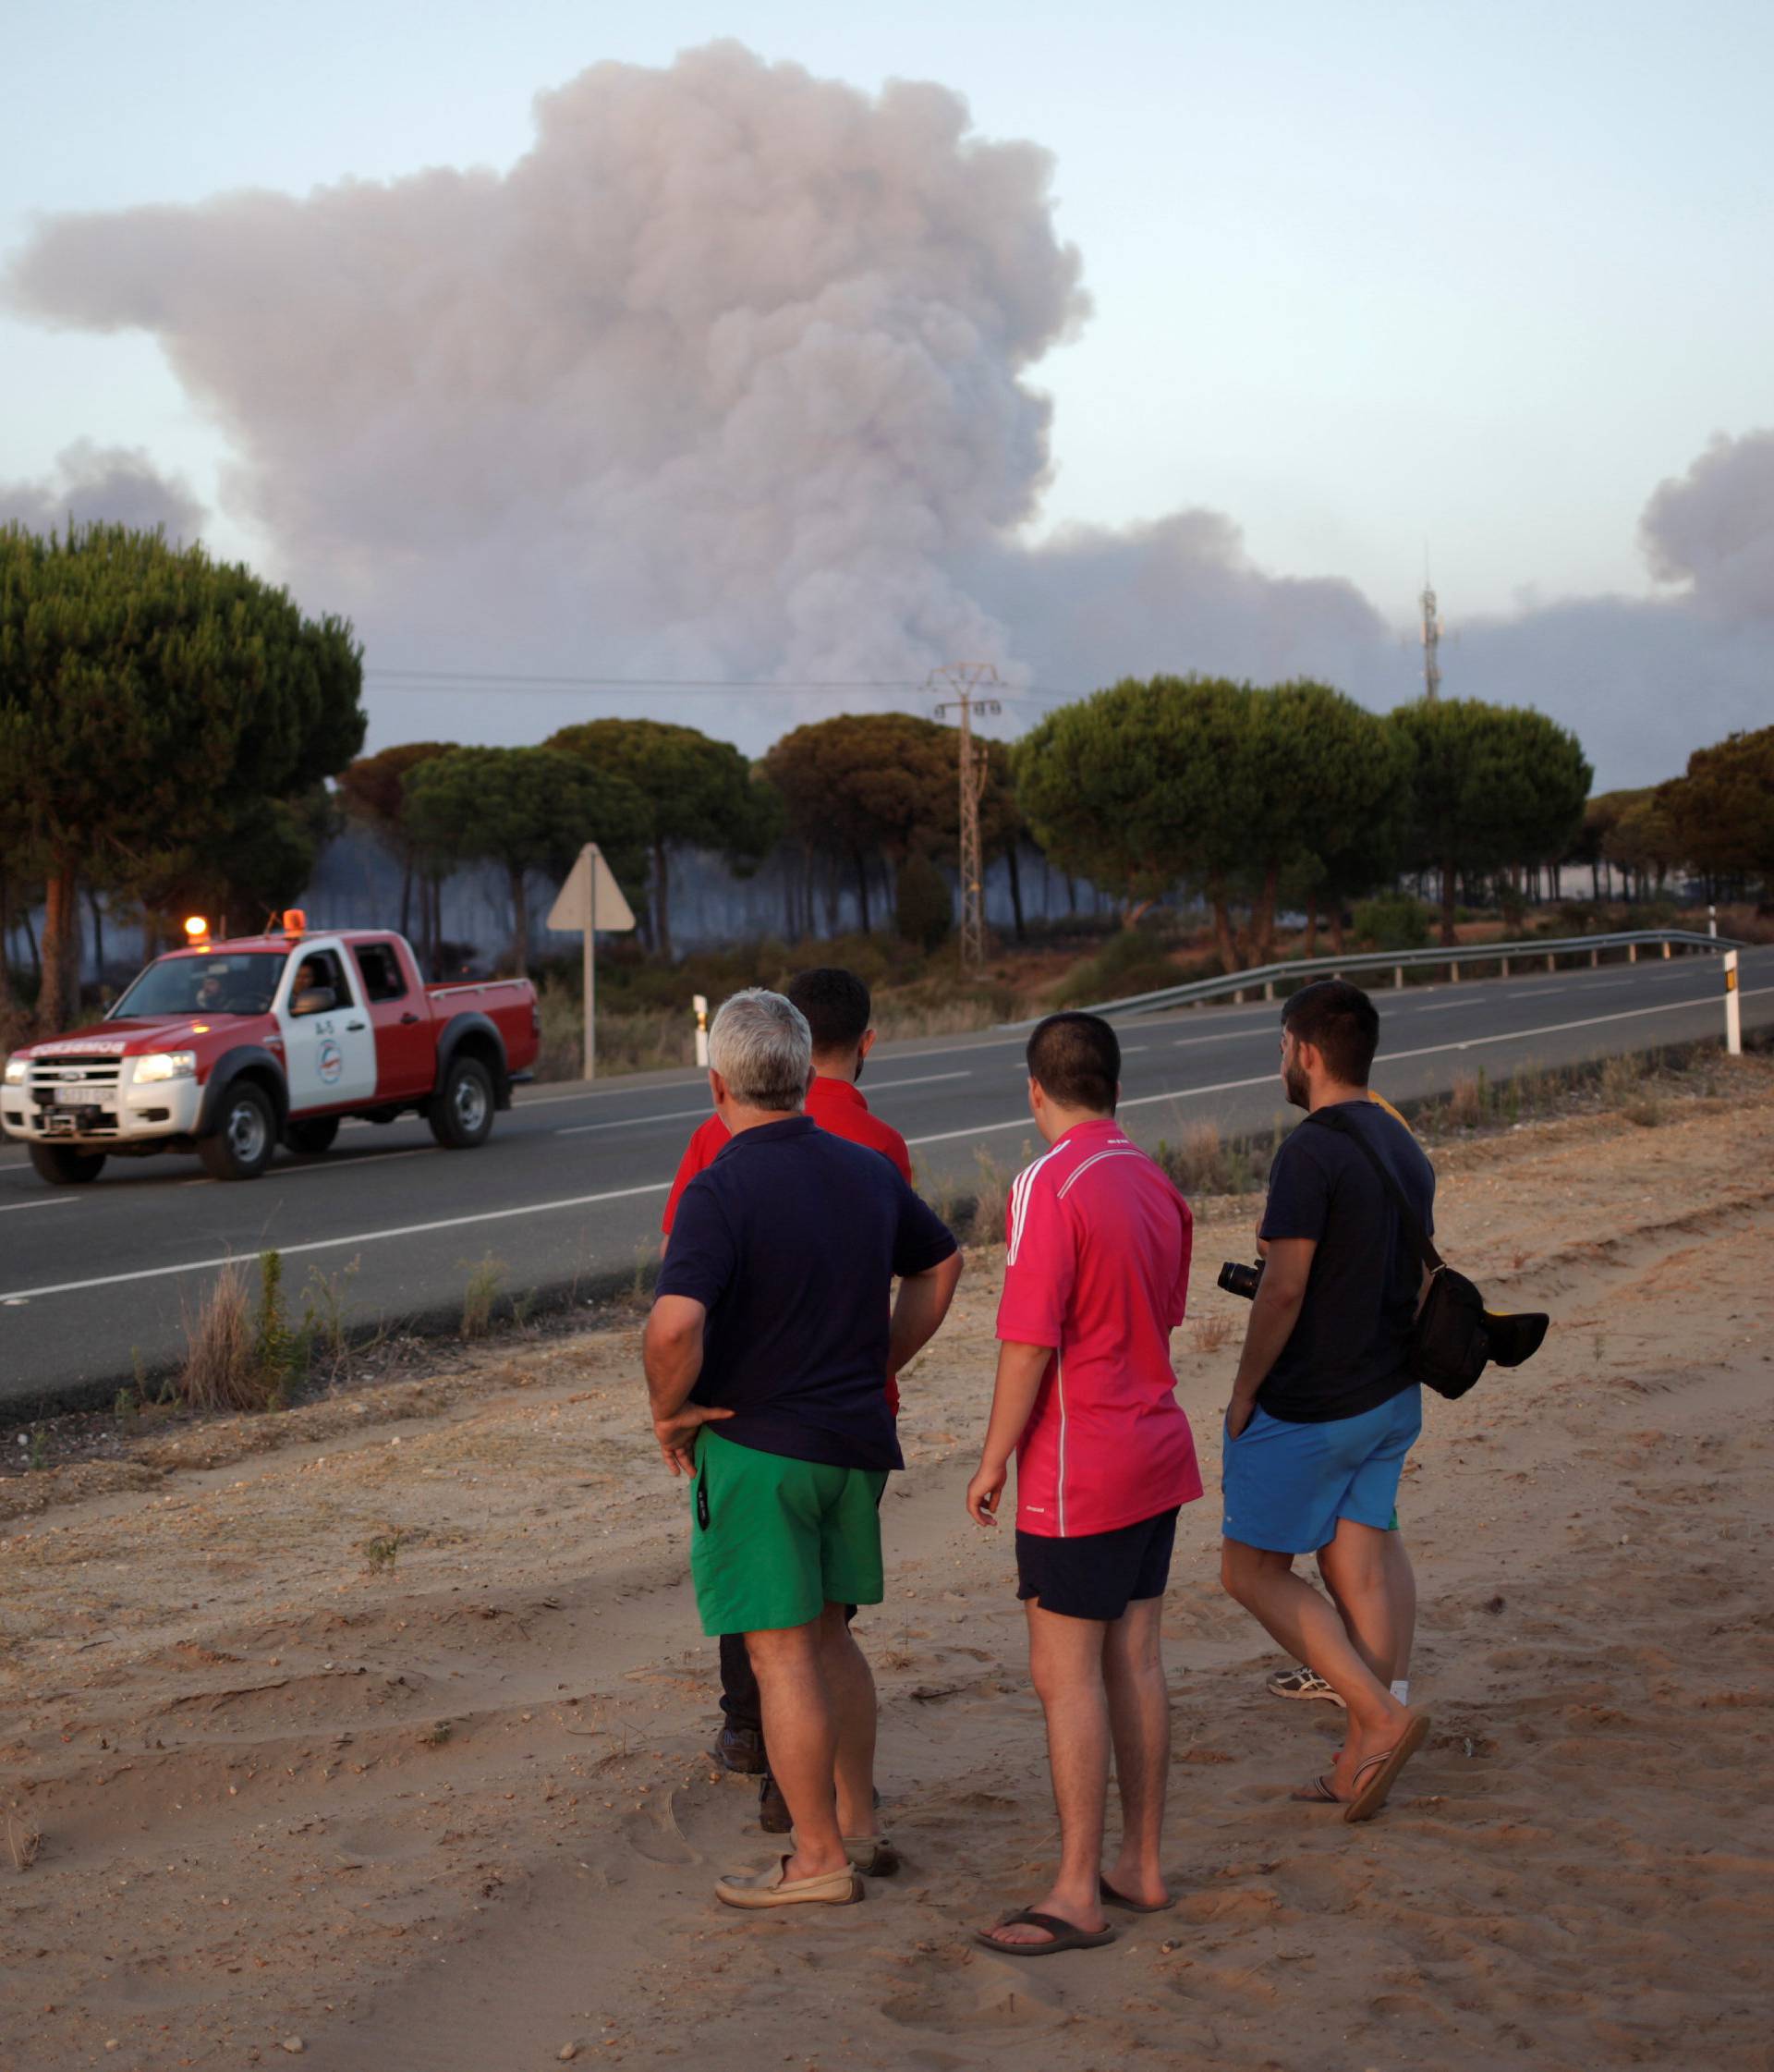 People look at smoke from a forest fire near Donana National Park in Mazagon